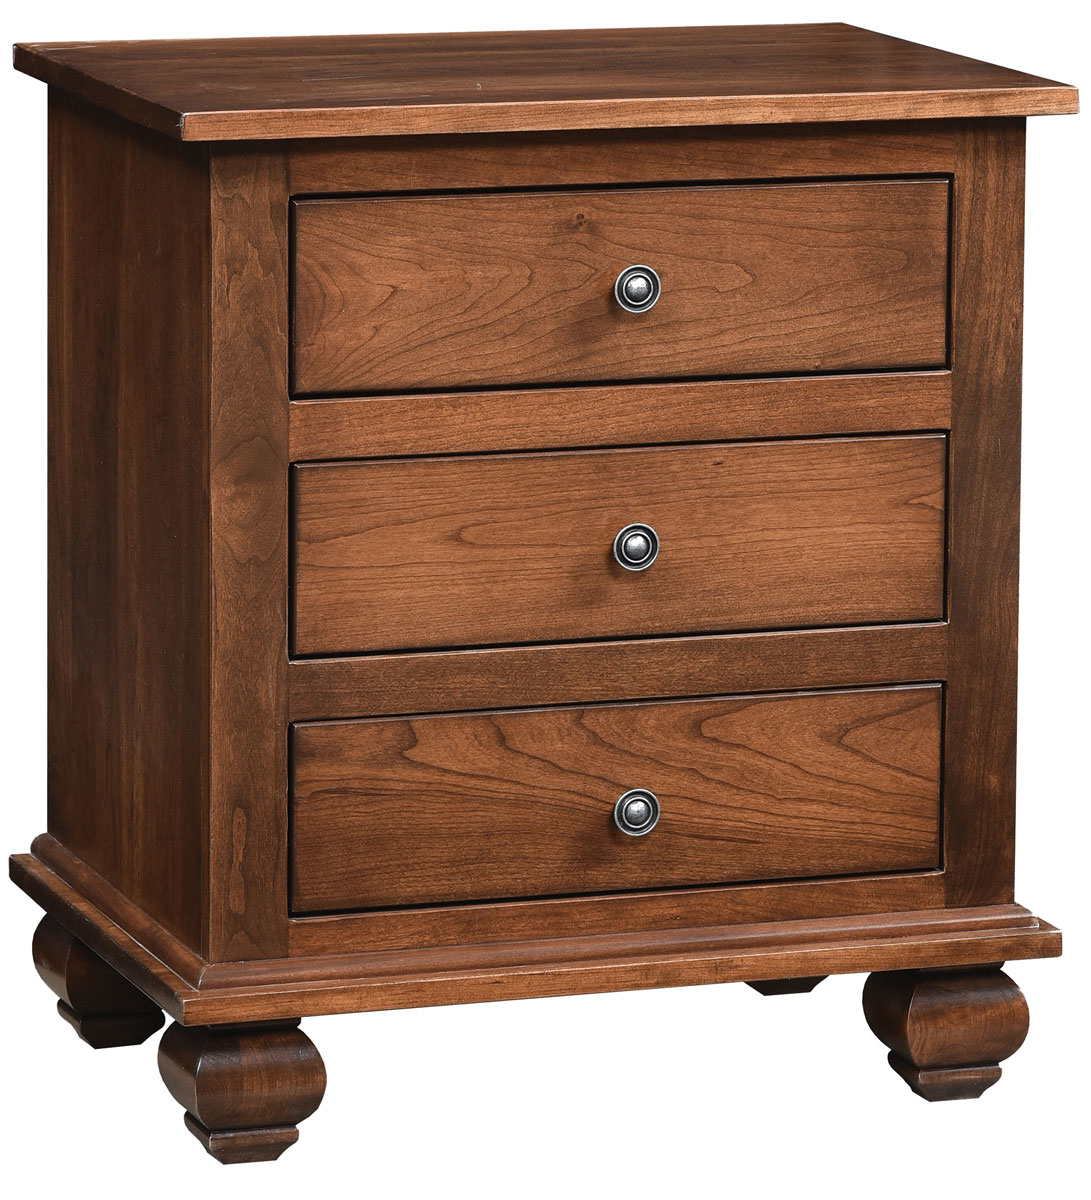 Stanton 3 Drawer Nightstand shown in Sap Cherry with FC-9090 Chocolate Spice Finish.